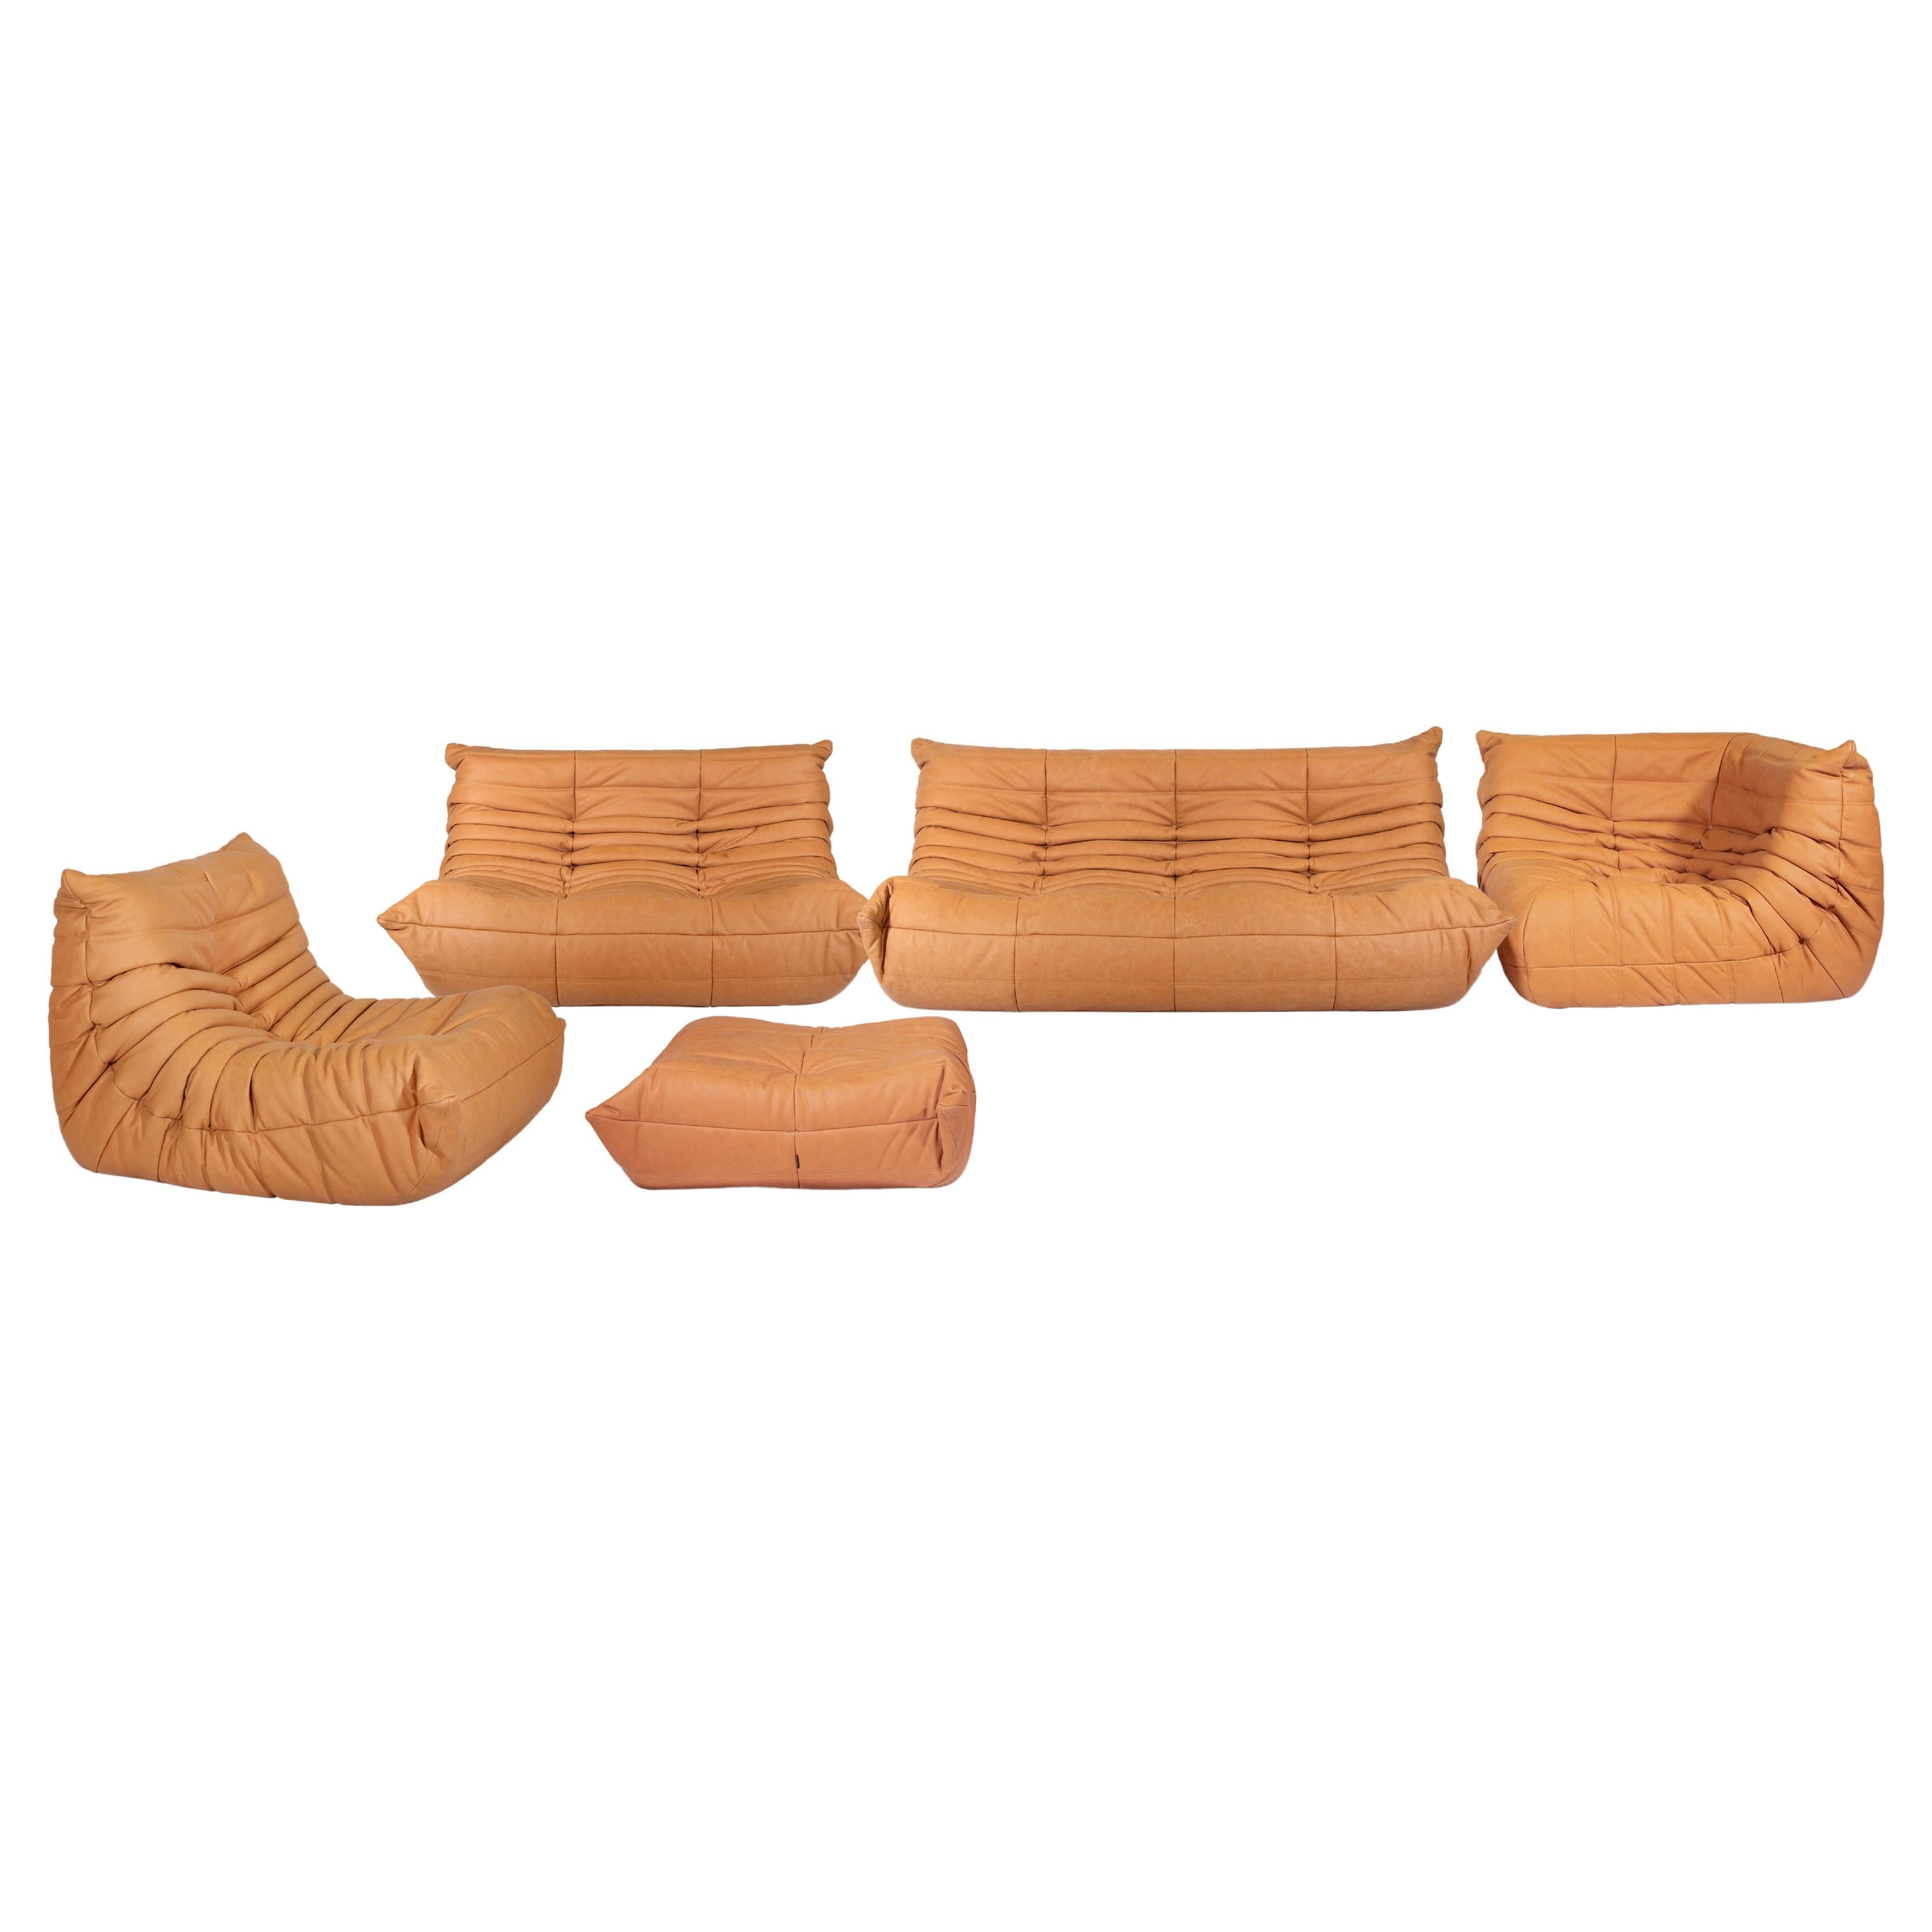 Togo sofa set is a 1990s design sofa set designed by Michel Ducaroy for Ligne Roset.

A Ligne Roset classic, Michel Ducaroy's Togo has been the ultimate in comfort and style for over forty years.

The set consist in four cognac leather all-foam